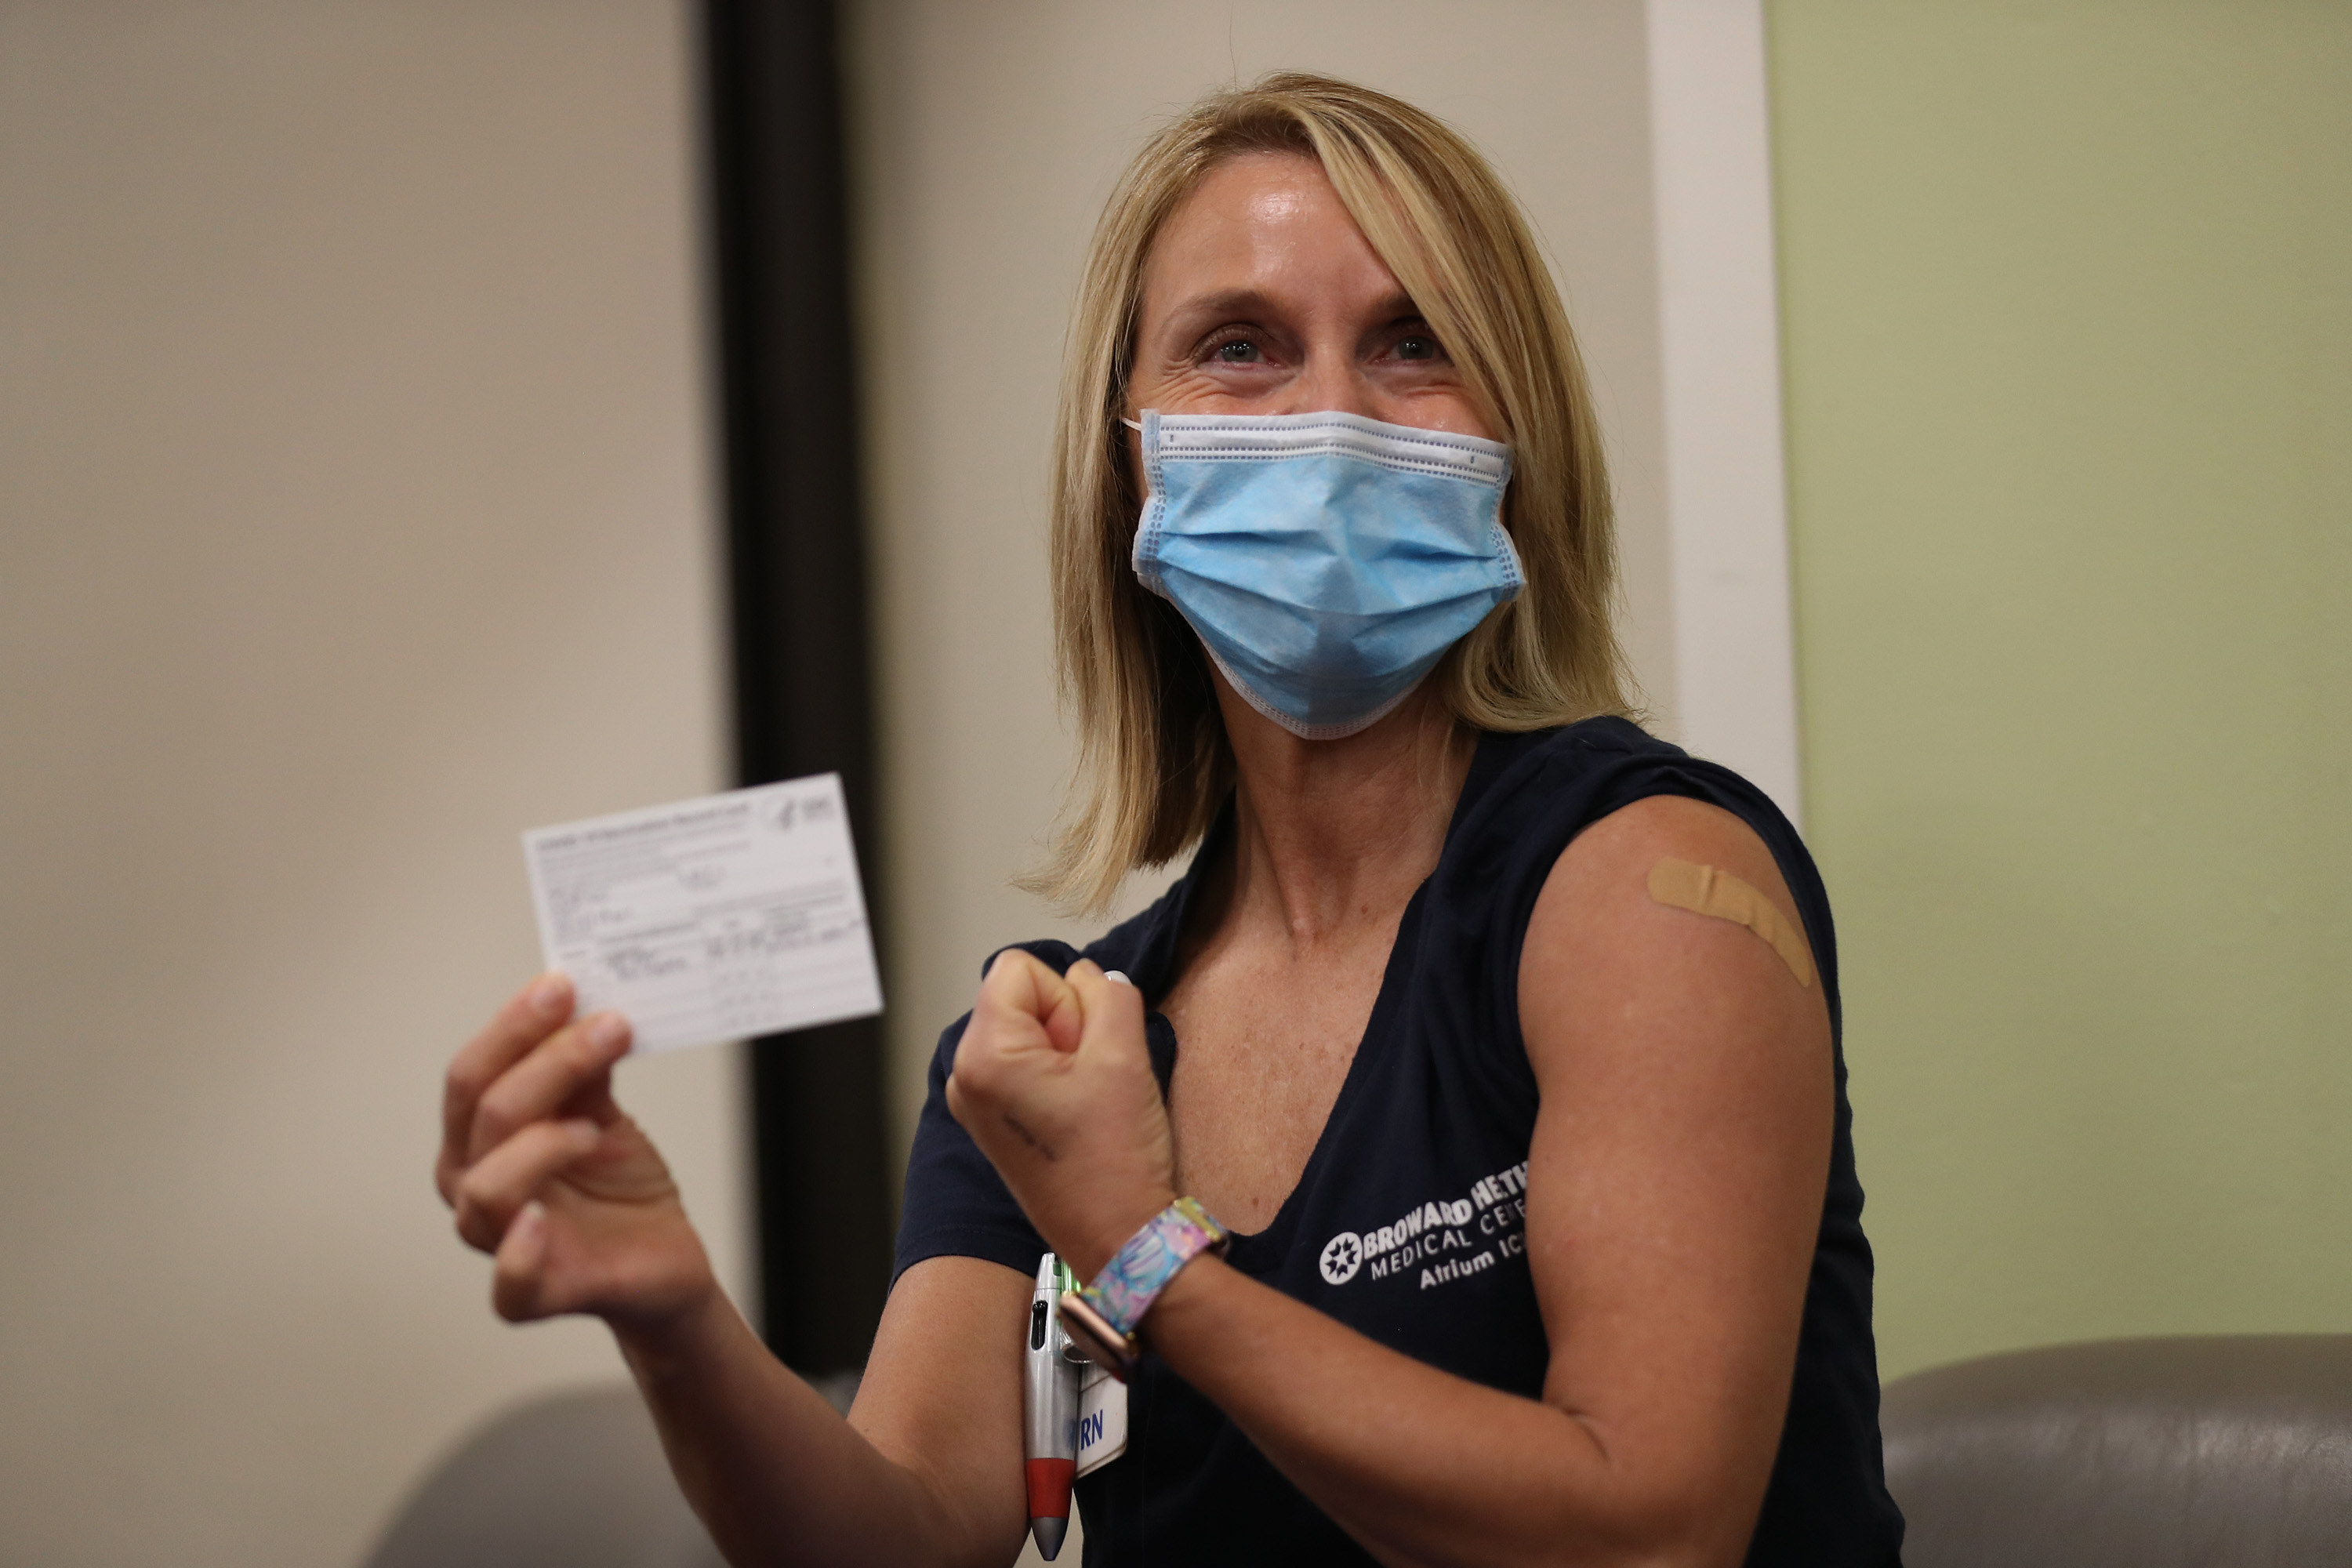 Nurse flexes her arm as she shows off her COVID-19 vaccine record card after receiving a Pfizer-BioNTech COVID-19 vaccine